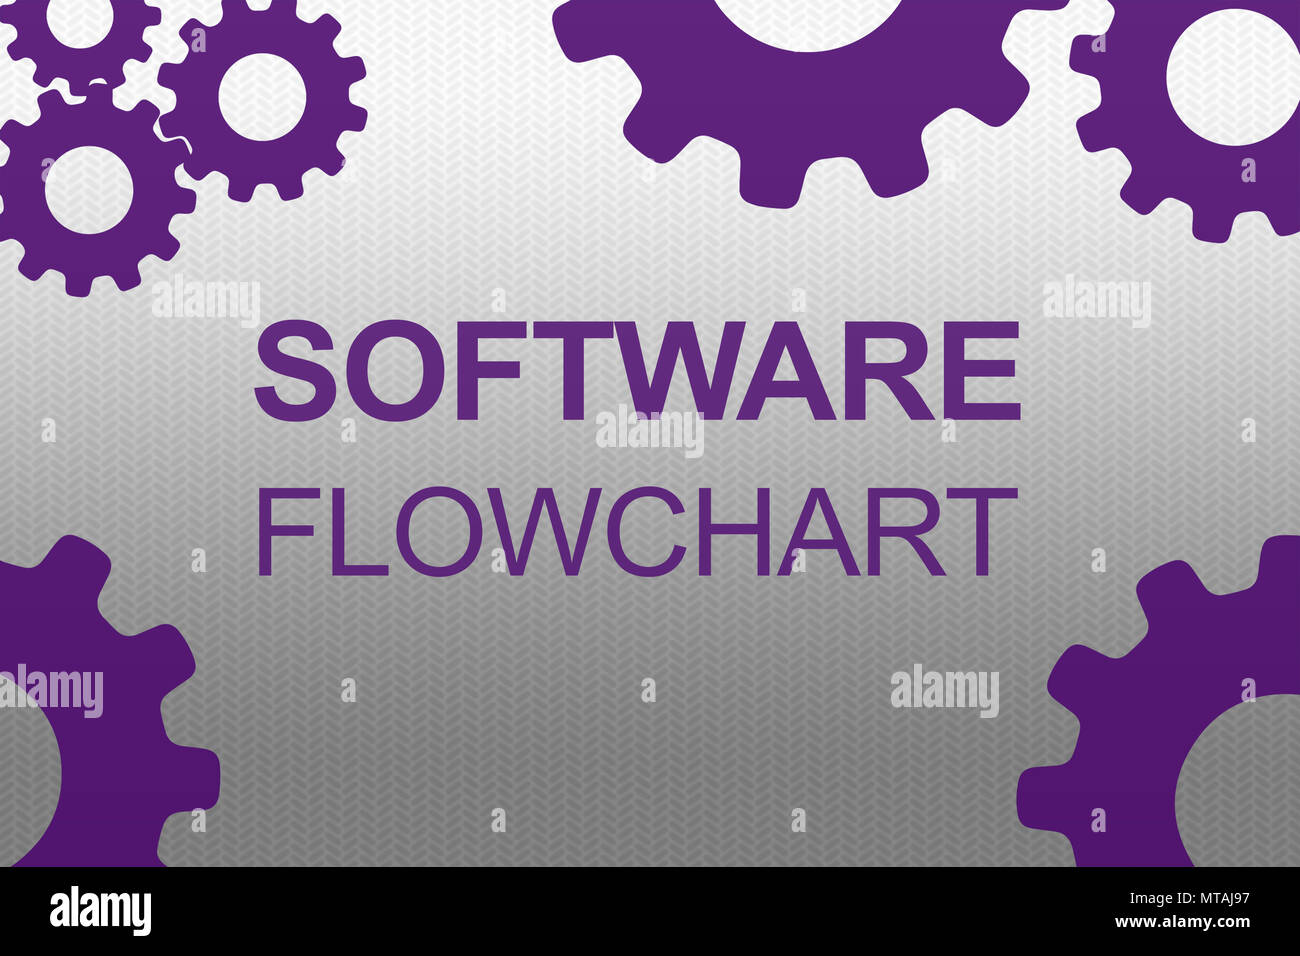 SOFTWARE FLOWCHART sign concept illustration with purple gear wheel figures on gray gradient background Stock Photo